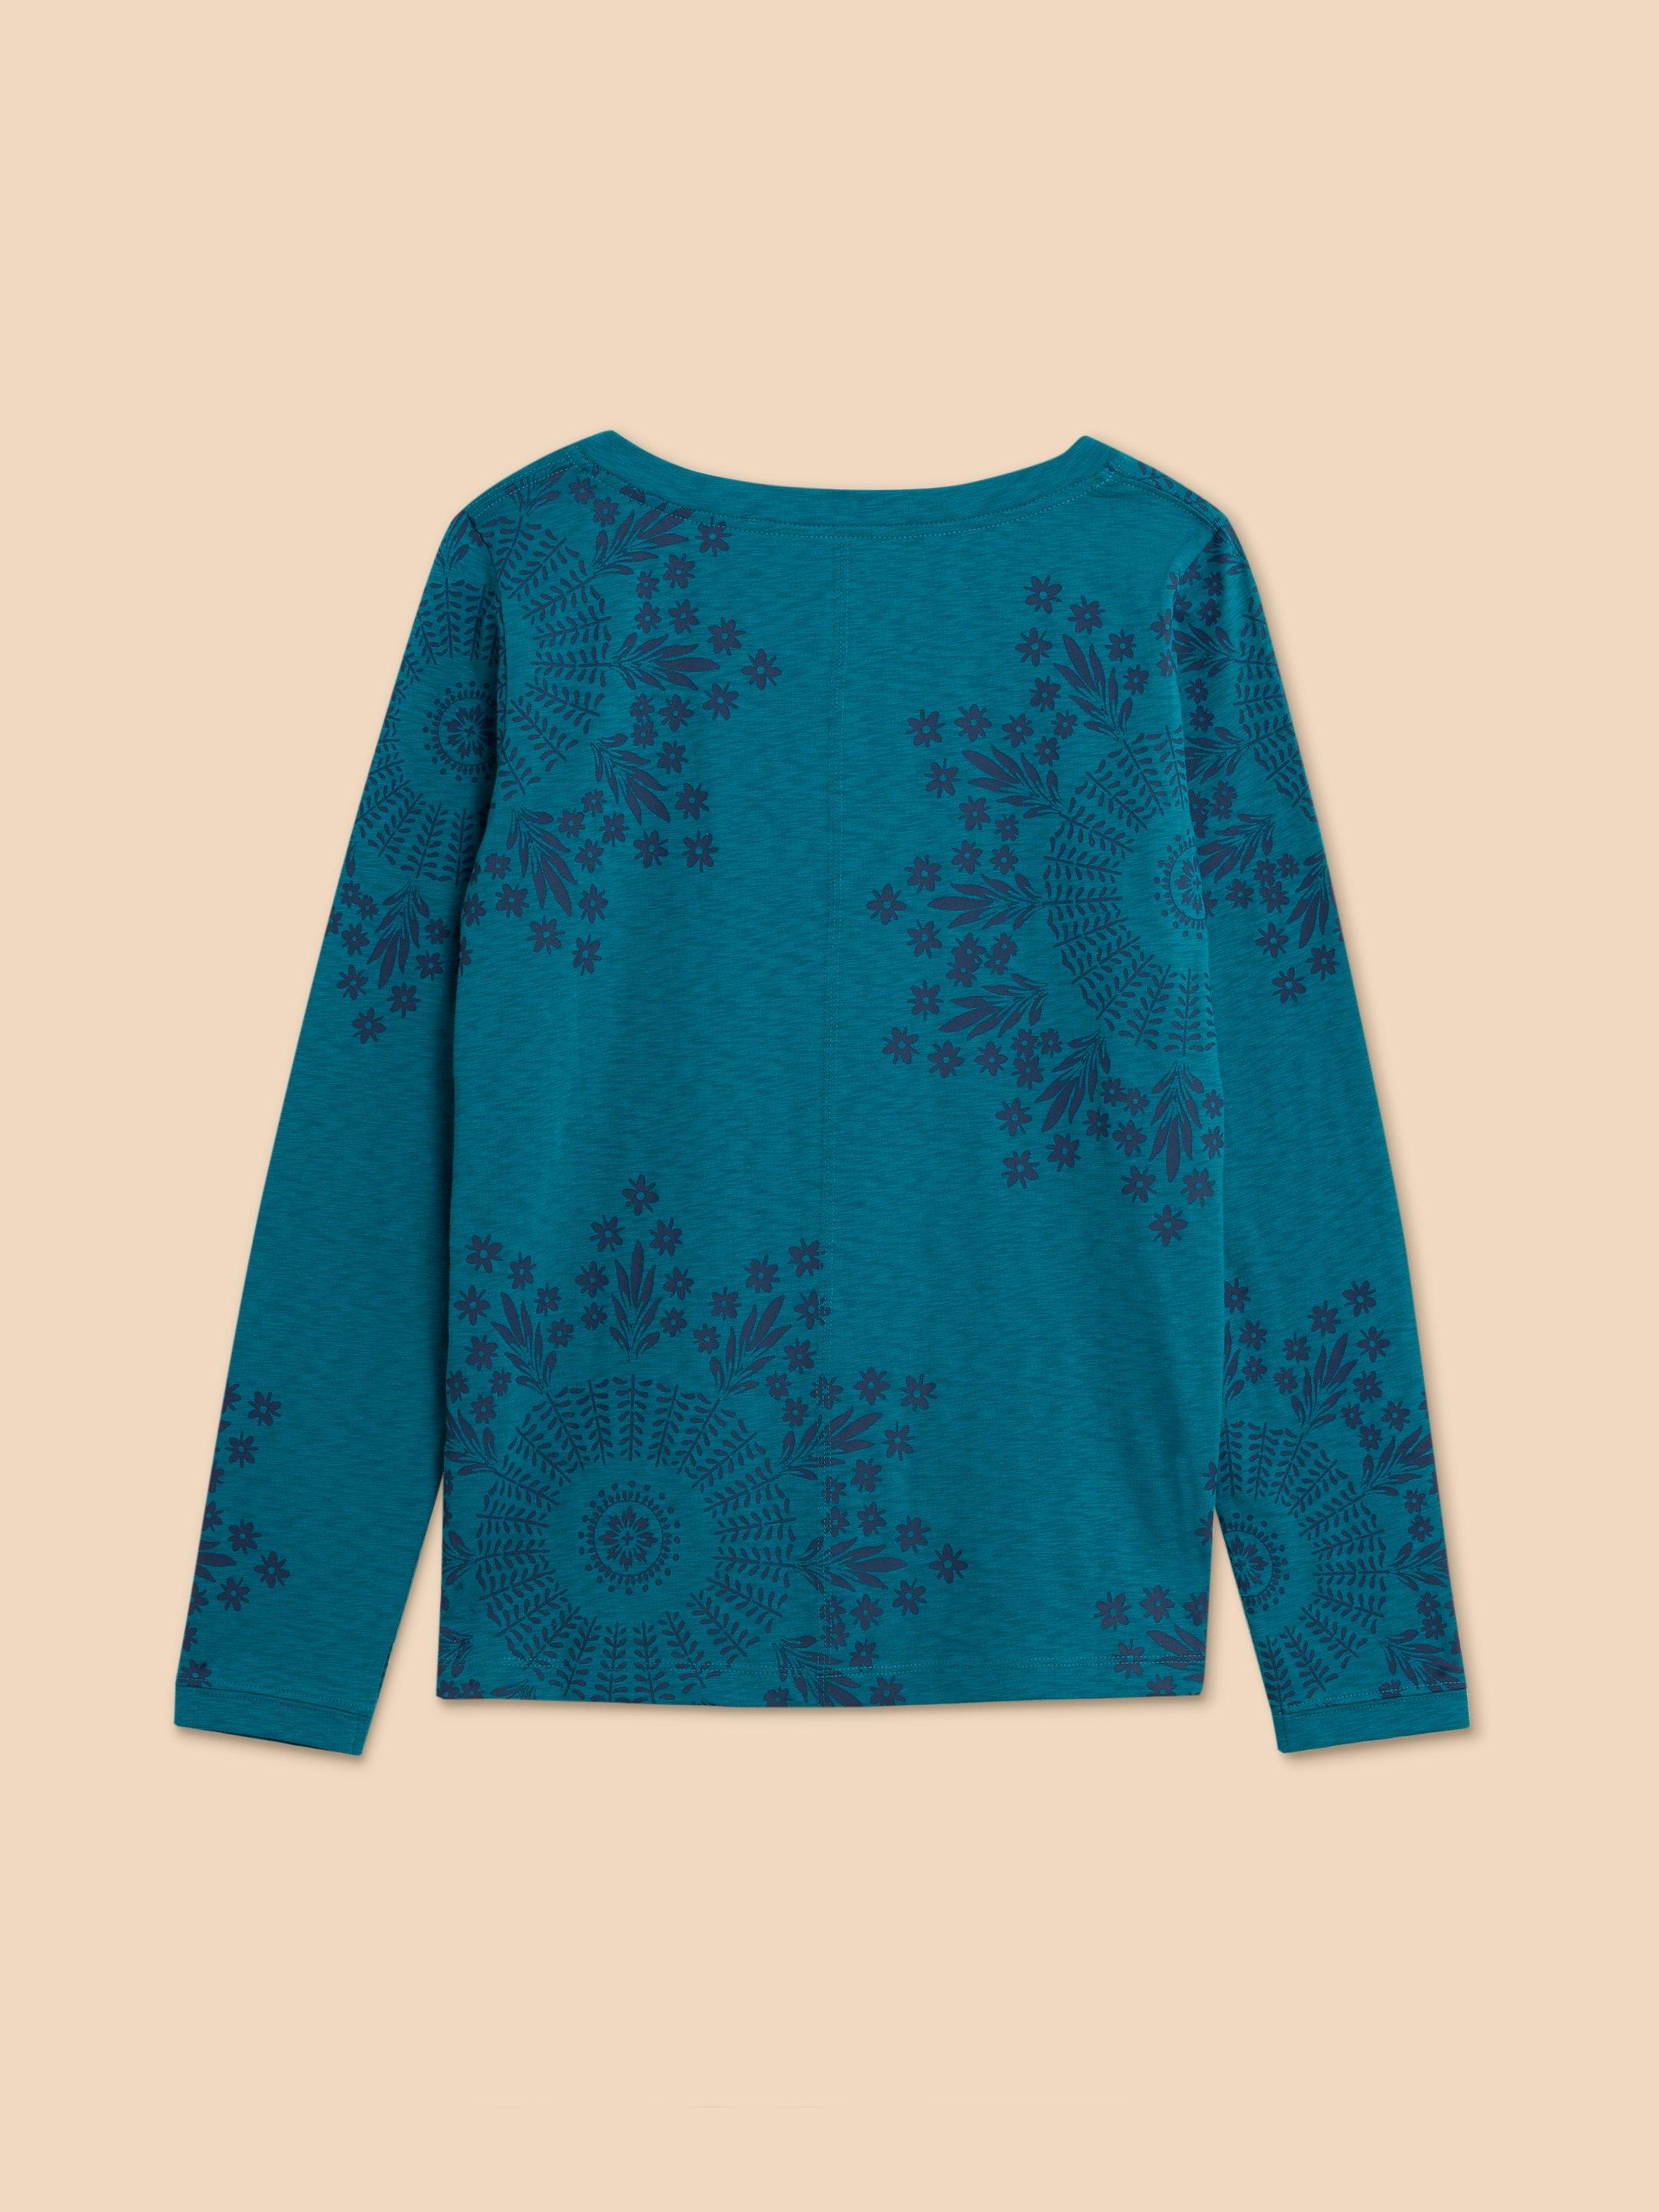 NELLY LS PRINTED TEE in TEAL PR - FLAT BACK